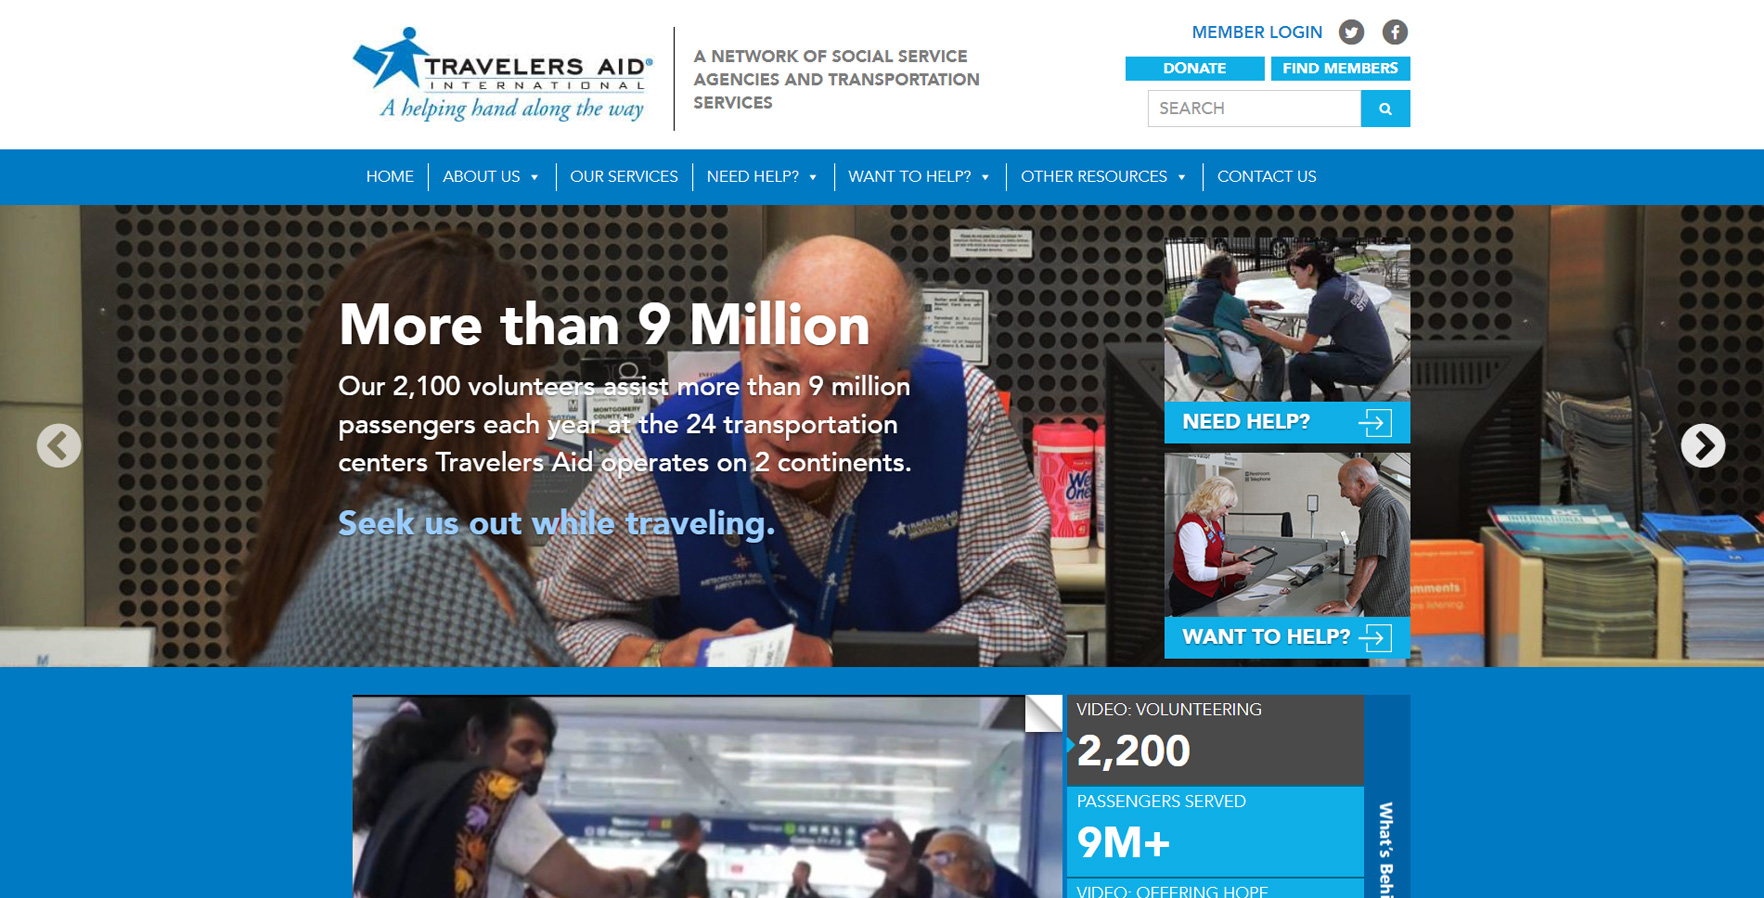 A WordPress website developed by Advanced Systemics for the Travelers Aid International